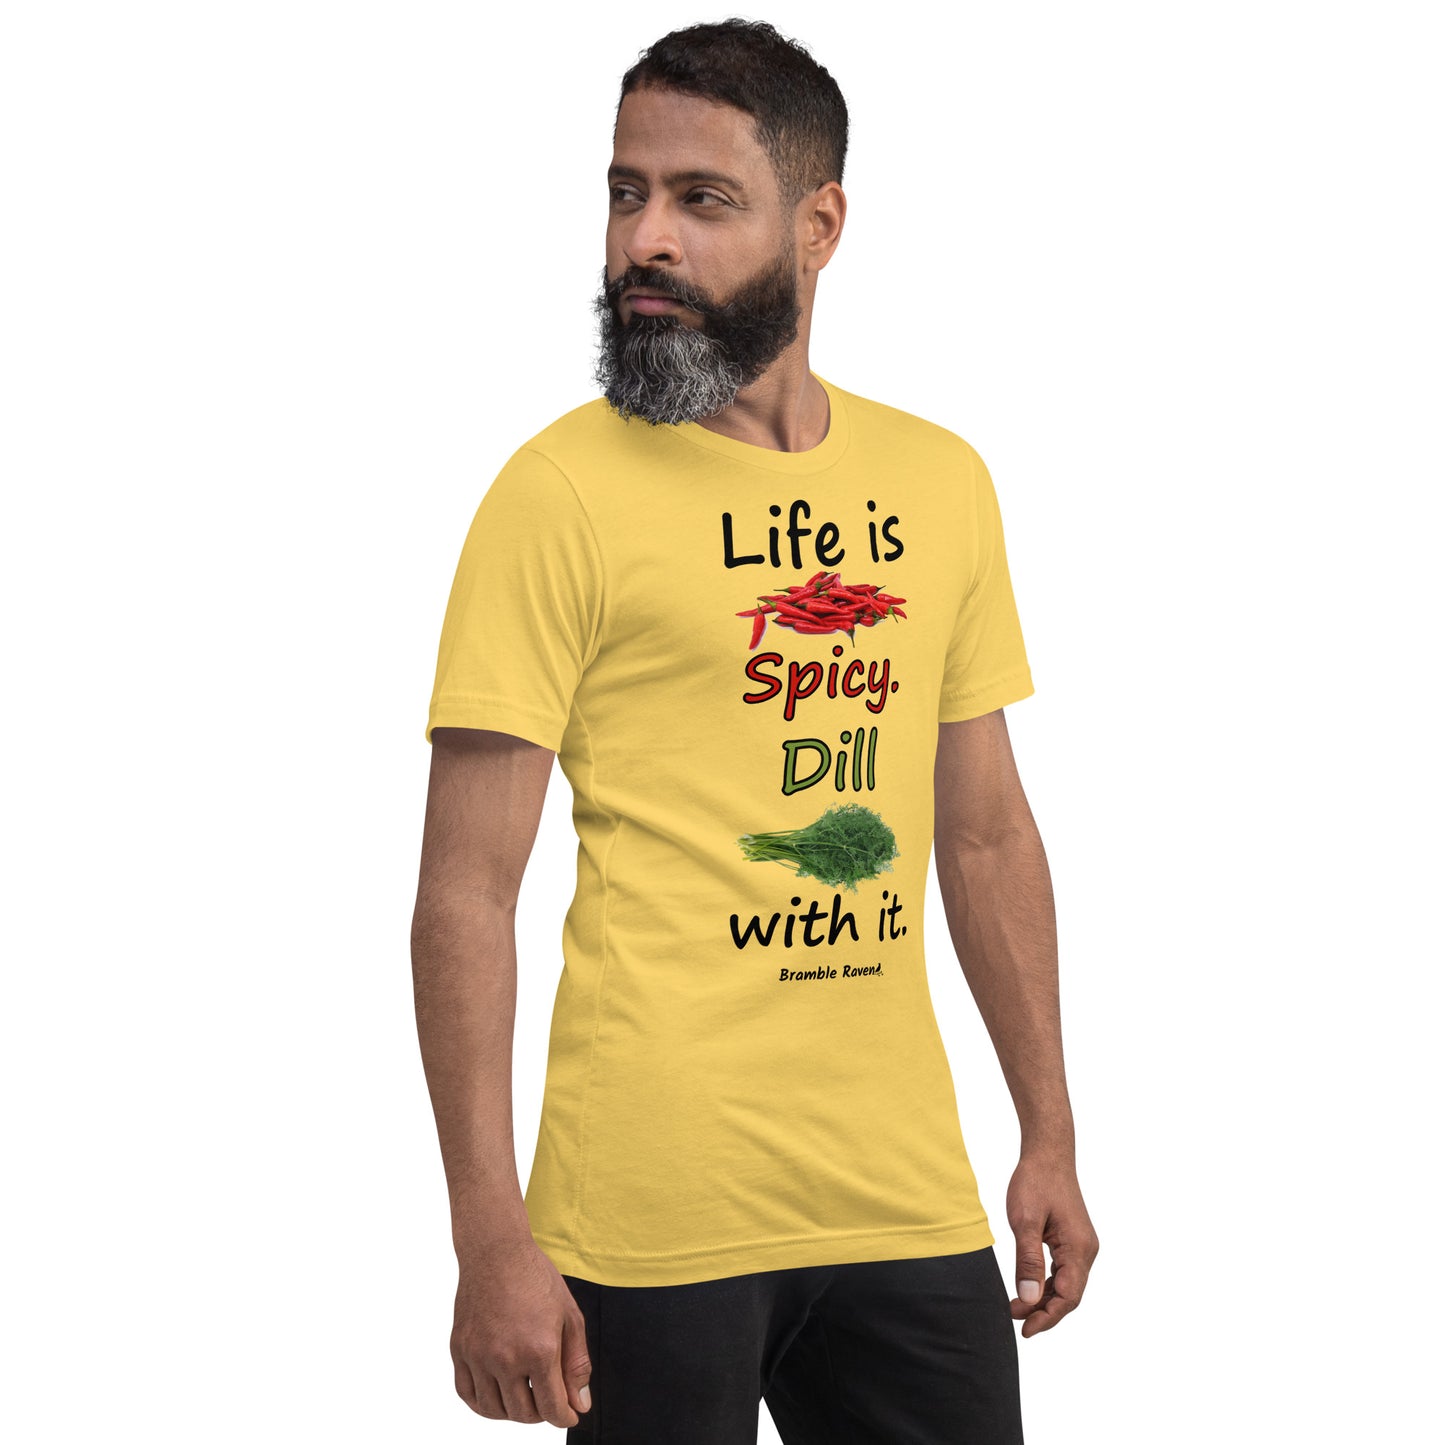 Yellow colored unisex t-shirt. Features text: Life is Spicy. Dill with it. Graphic of chili peppers and dill weed. Made of preshrunk cotton with side seams. Shown on male model facing right.